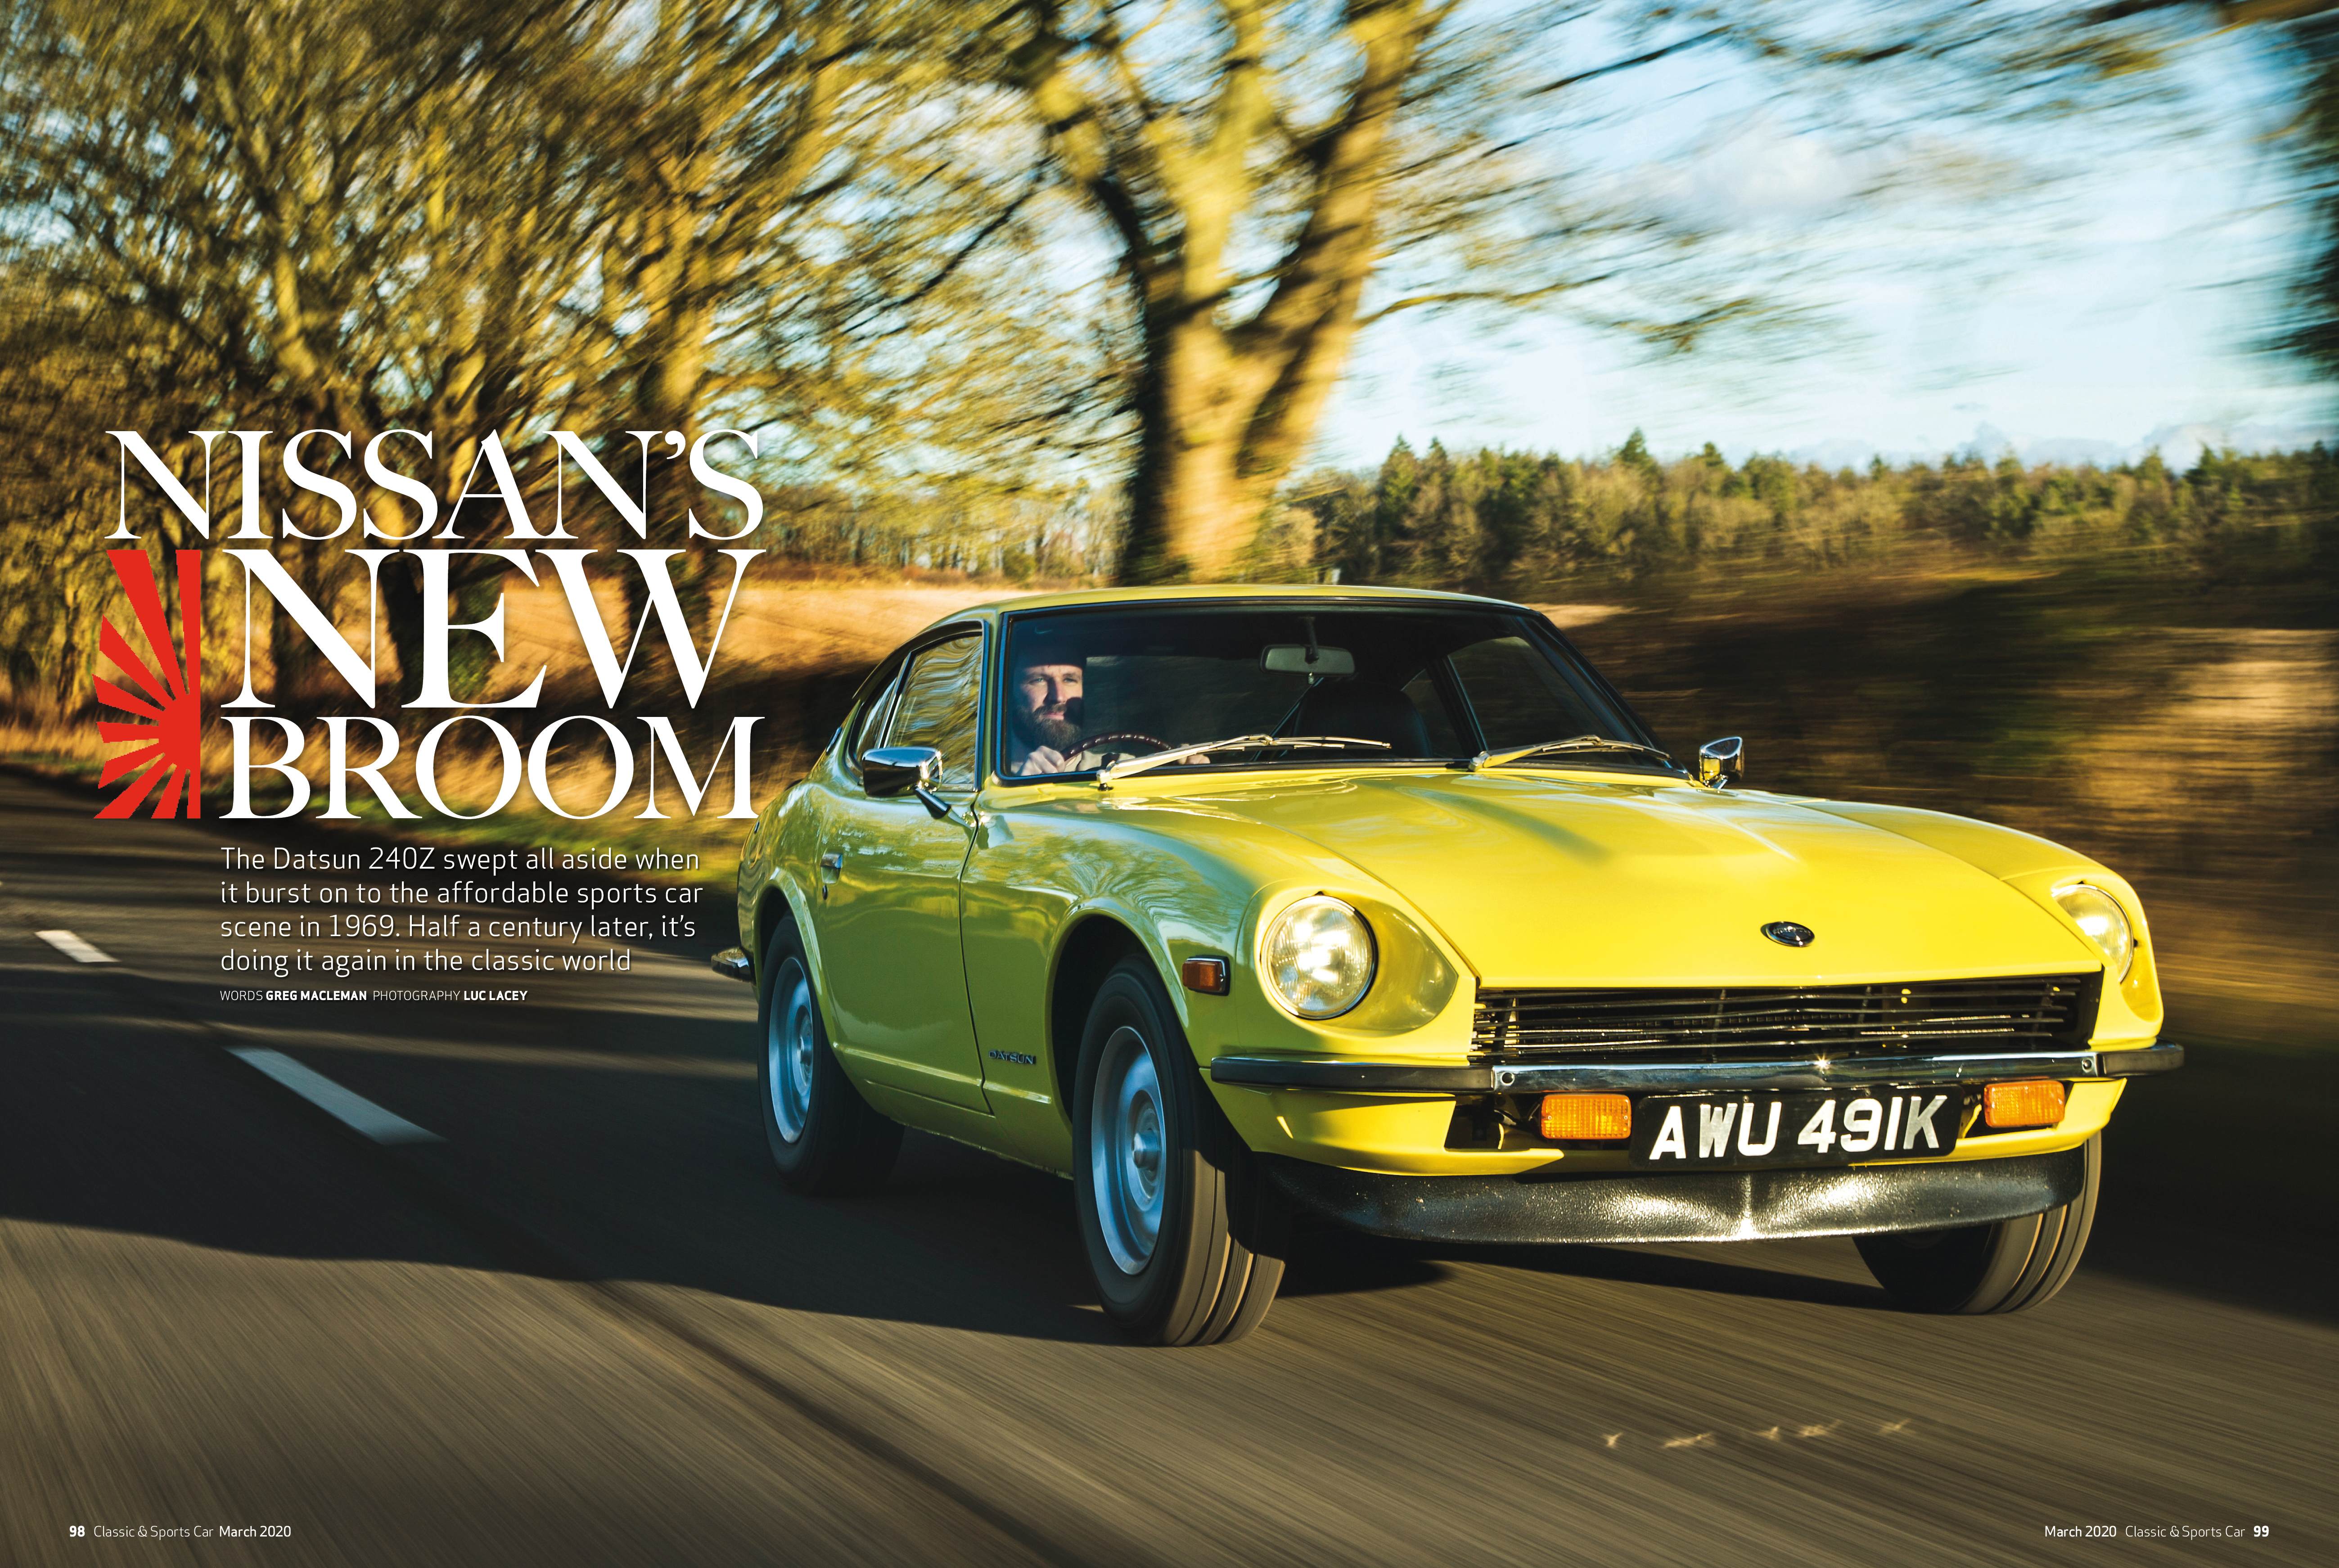 Classic & Sports Car – 240Z stars in Japanese special: Inside the March 2020 issue of C&SC